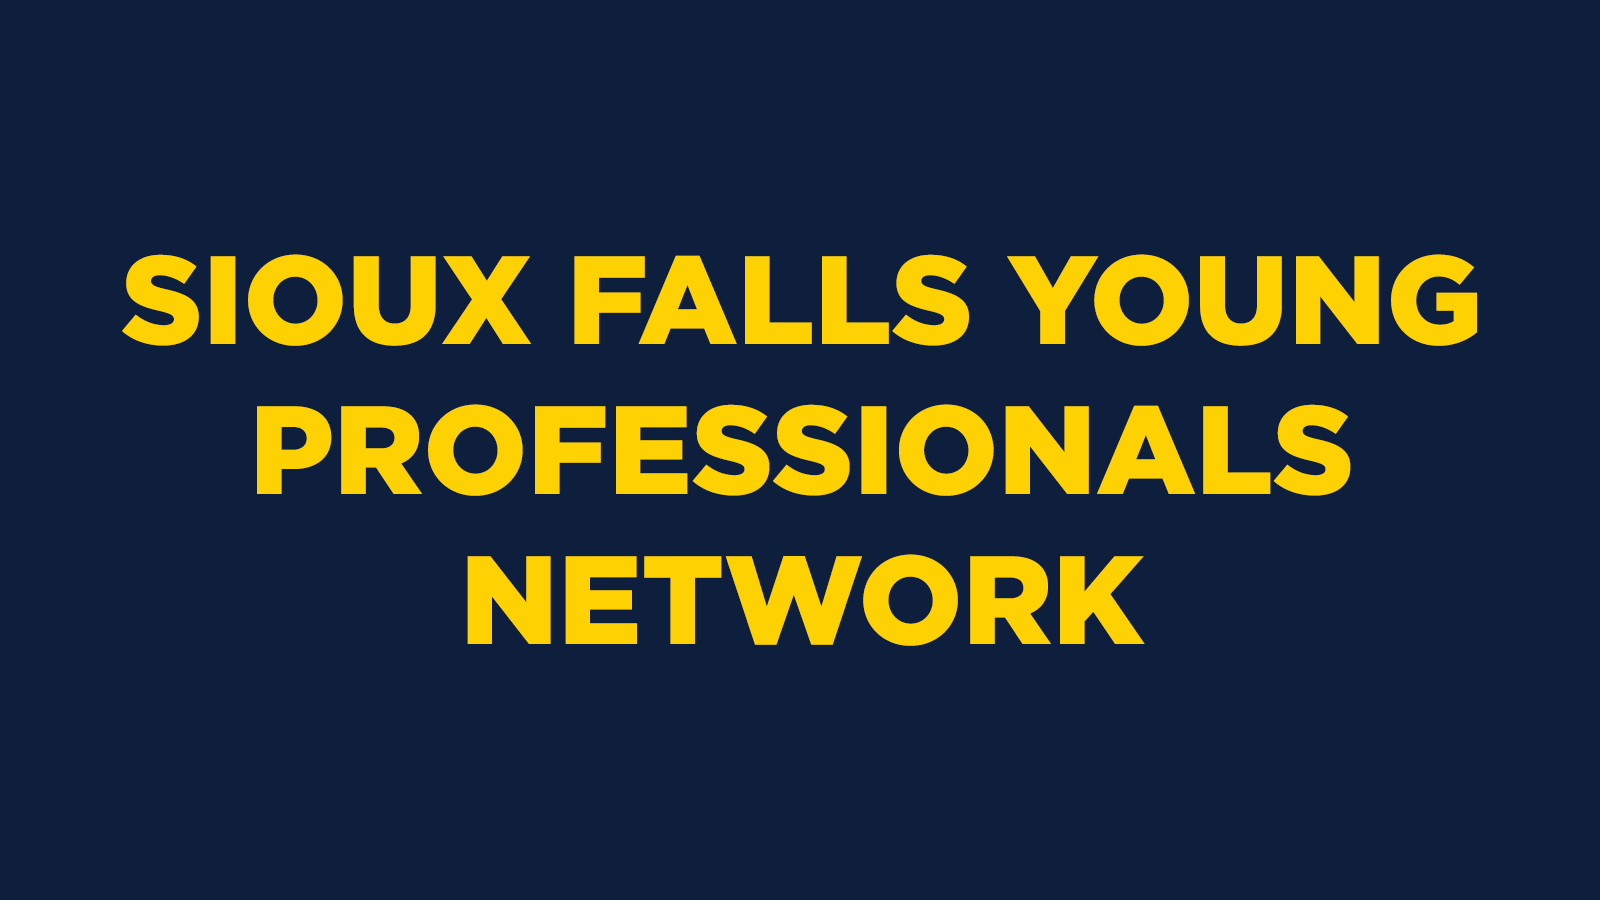 Sioux Falls Young Professionals Network